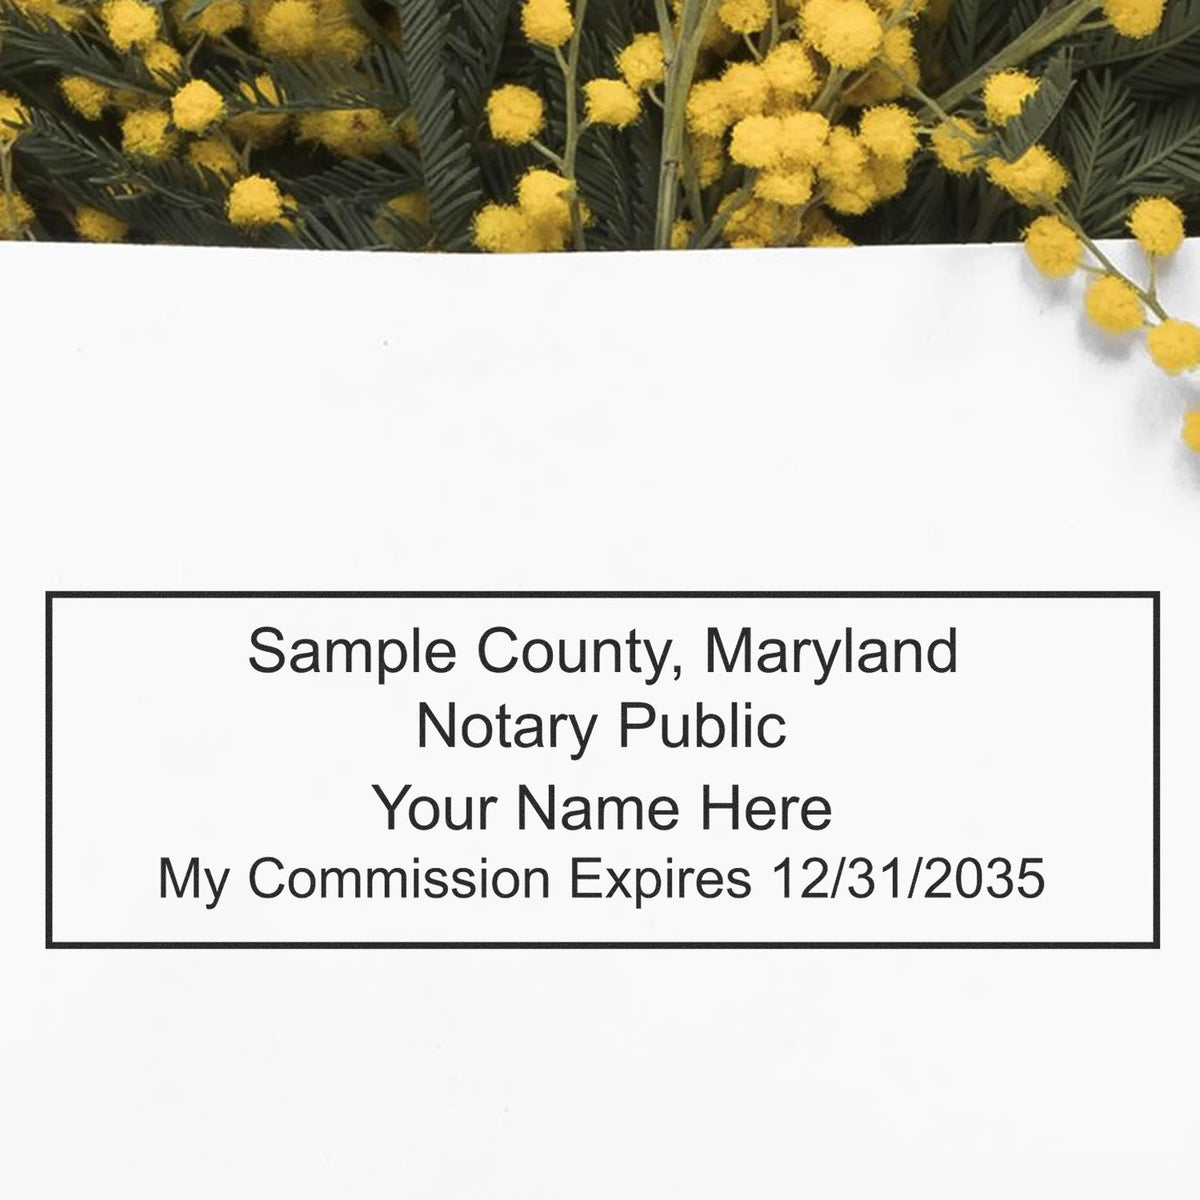 This paper is stamped with a sample imprint of the Super Slim Maryland Notary Public Stamp, signifying its quality and reliability.